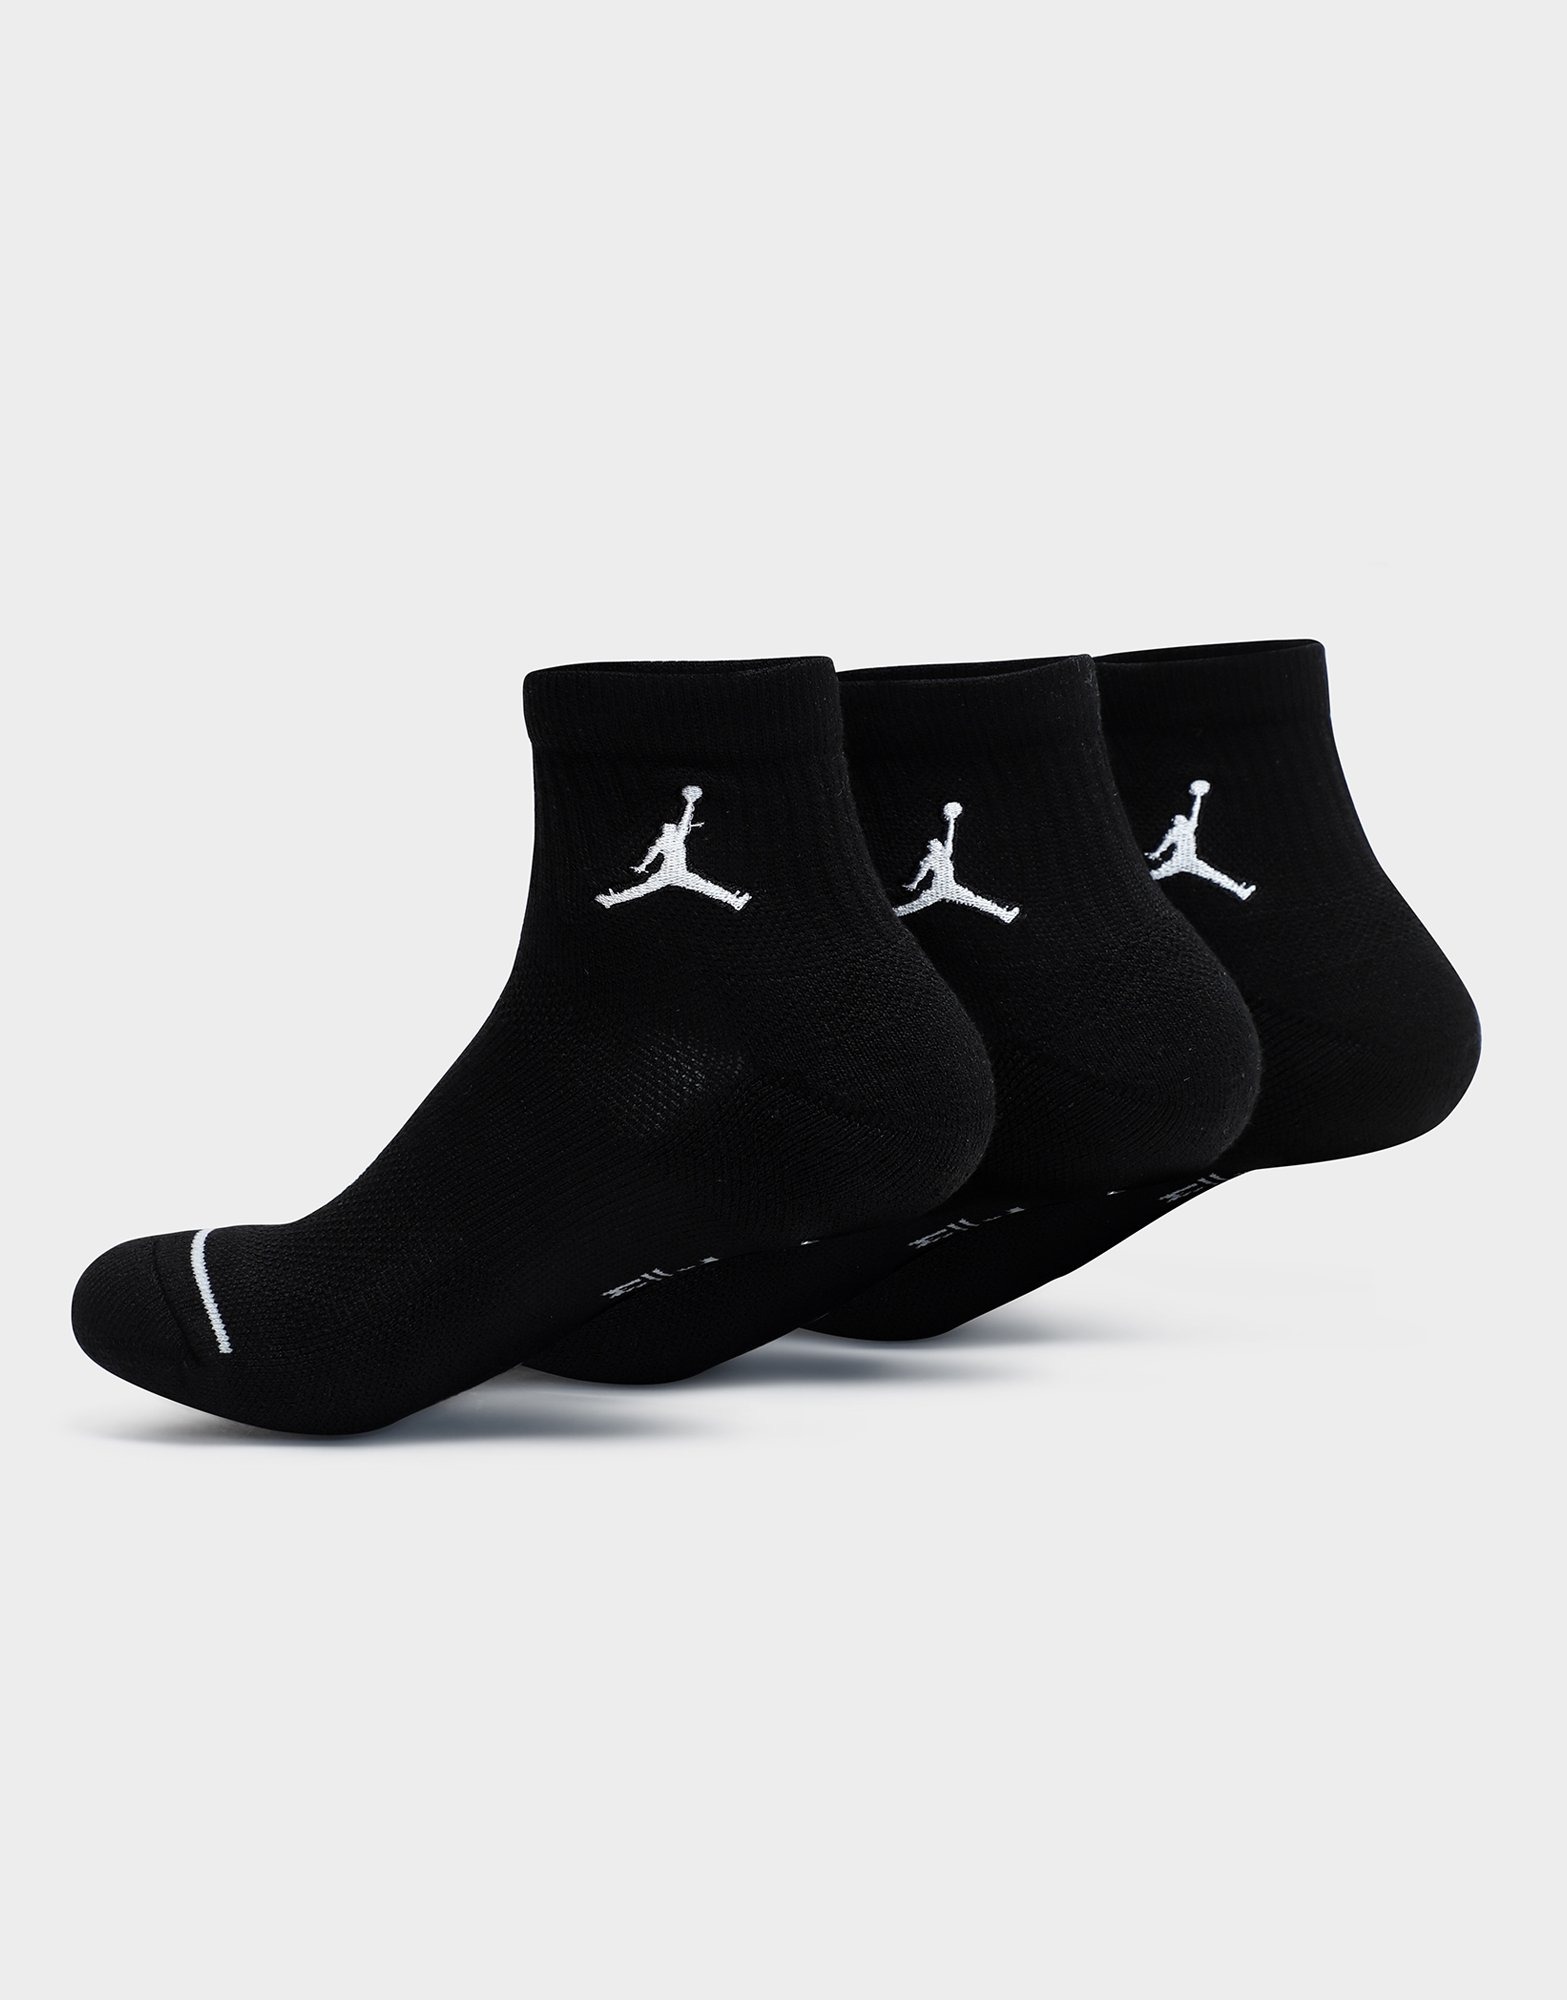 Moisture Wicking 2 Pairs-Youth X-Small 9-1 Details about   Reebok All Sport Youth Socks 